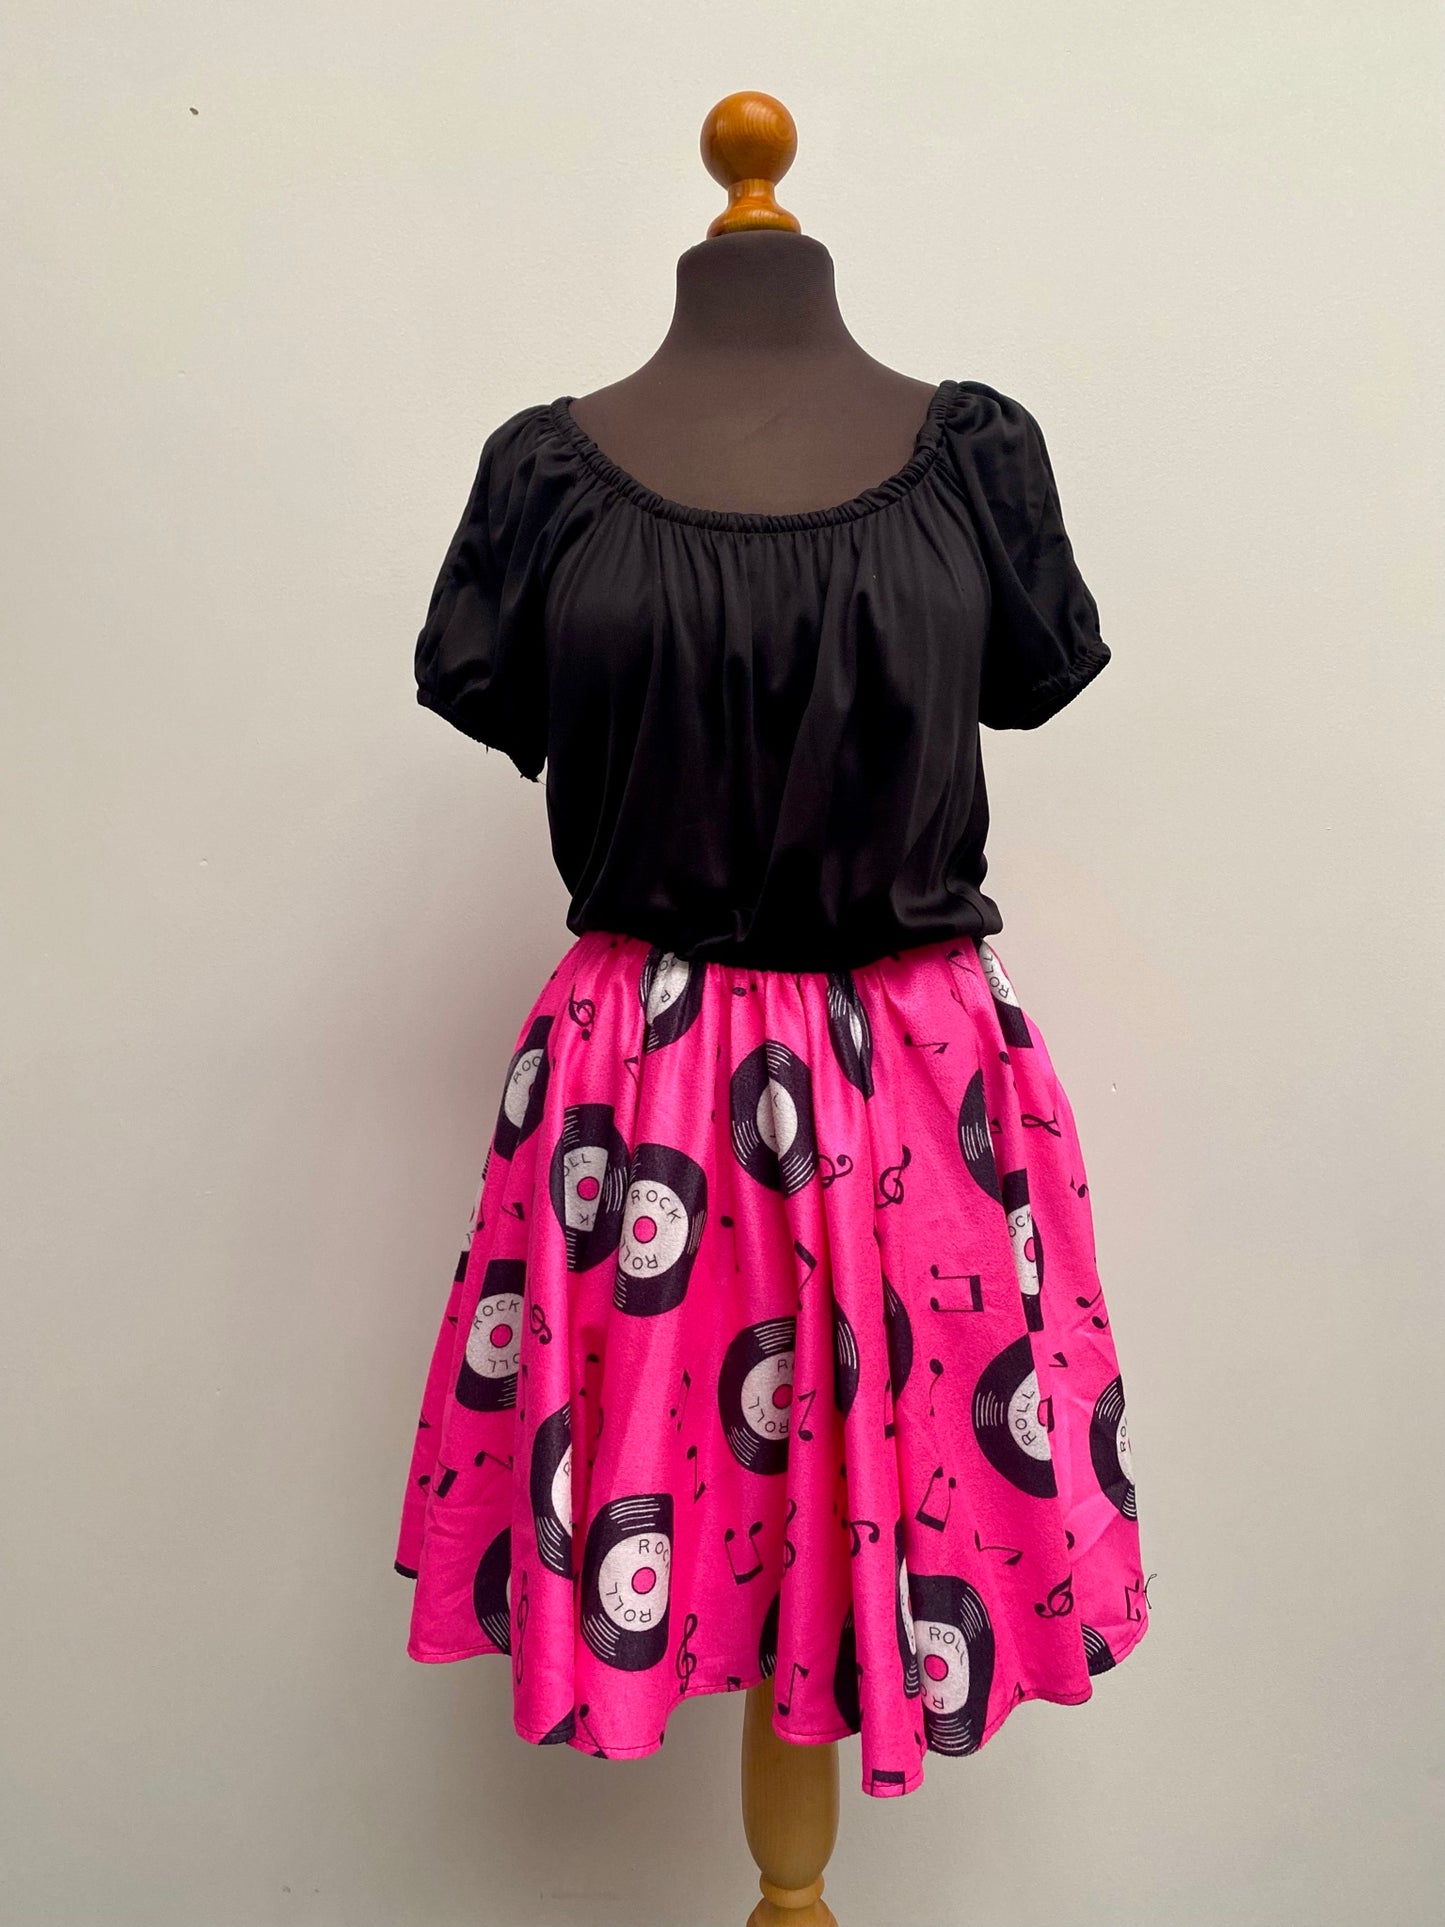 Ladies 50's pink black outfit record design dress Size 12 - Ex Hire Fancy Dress Costume